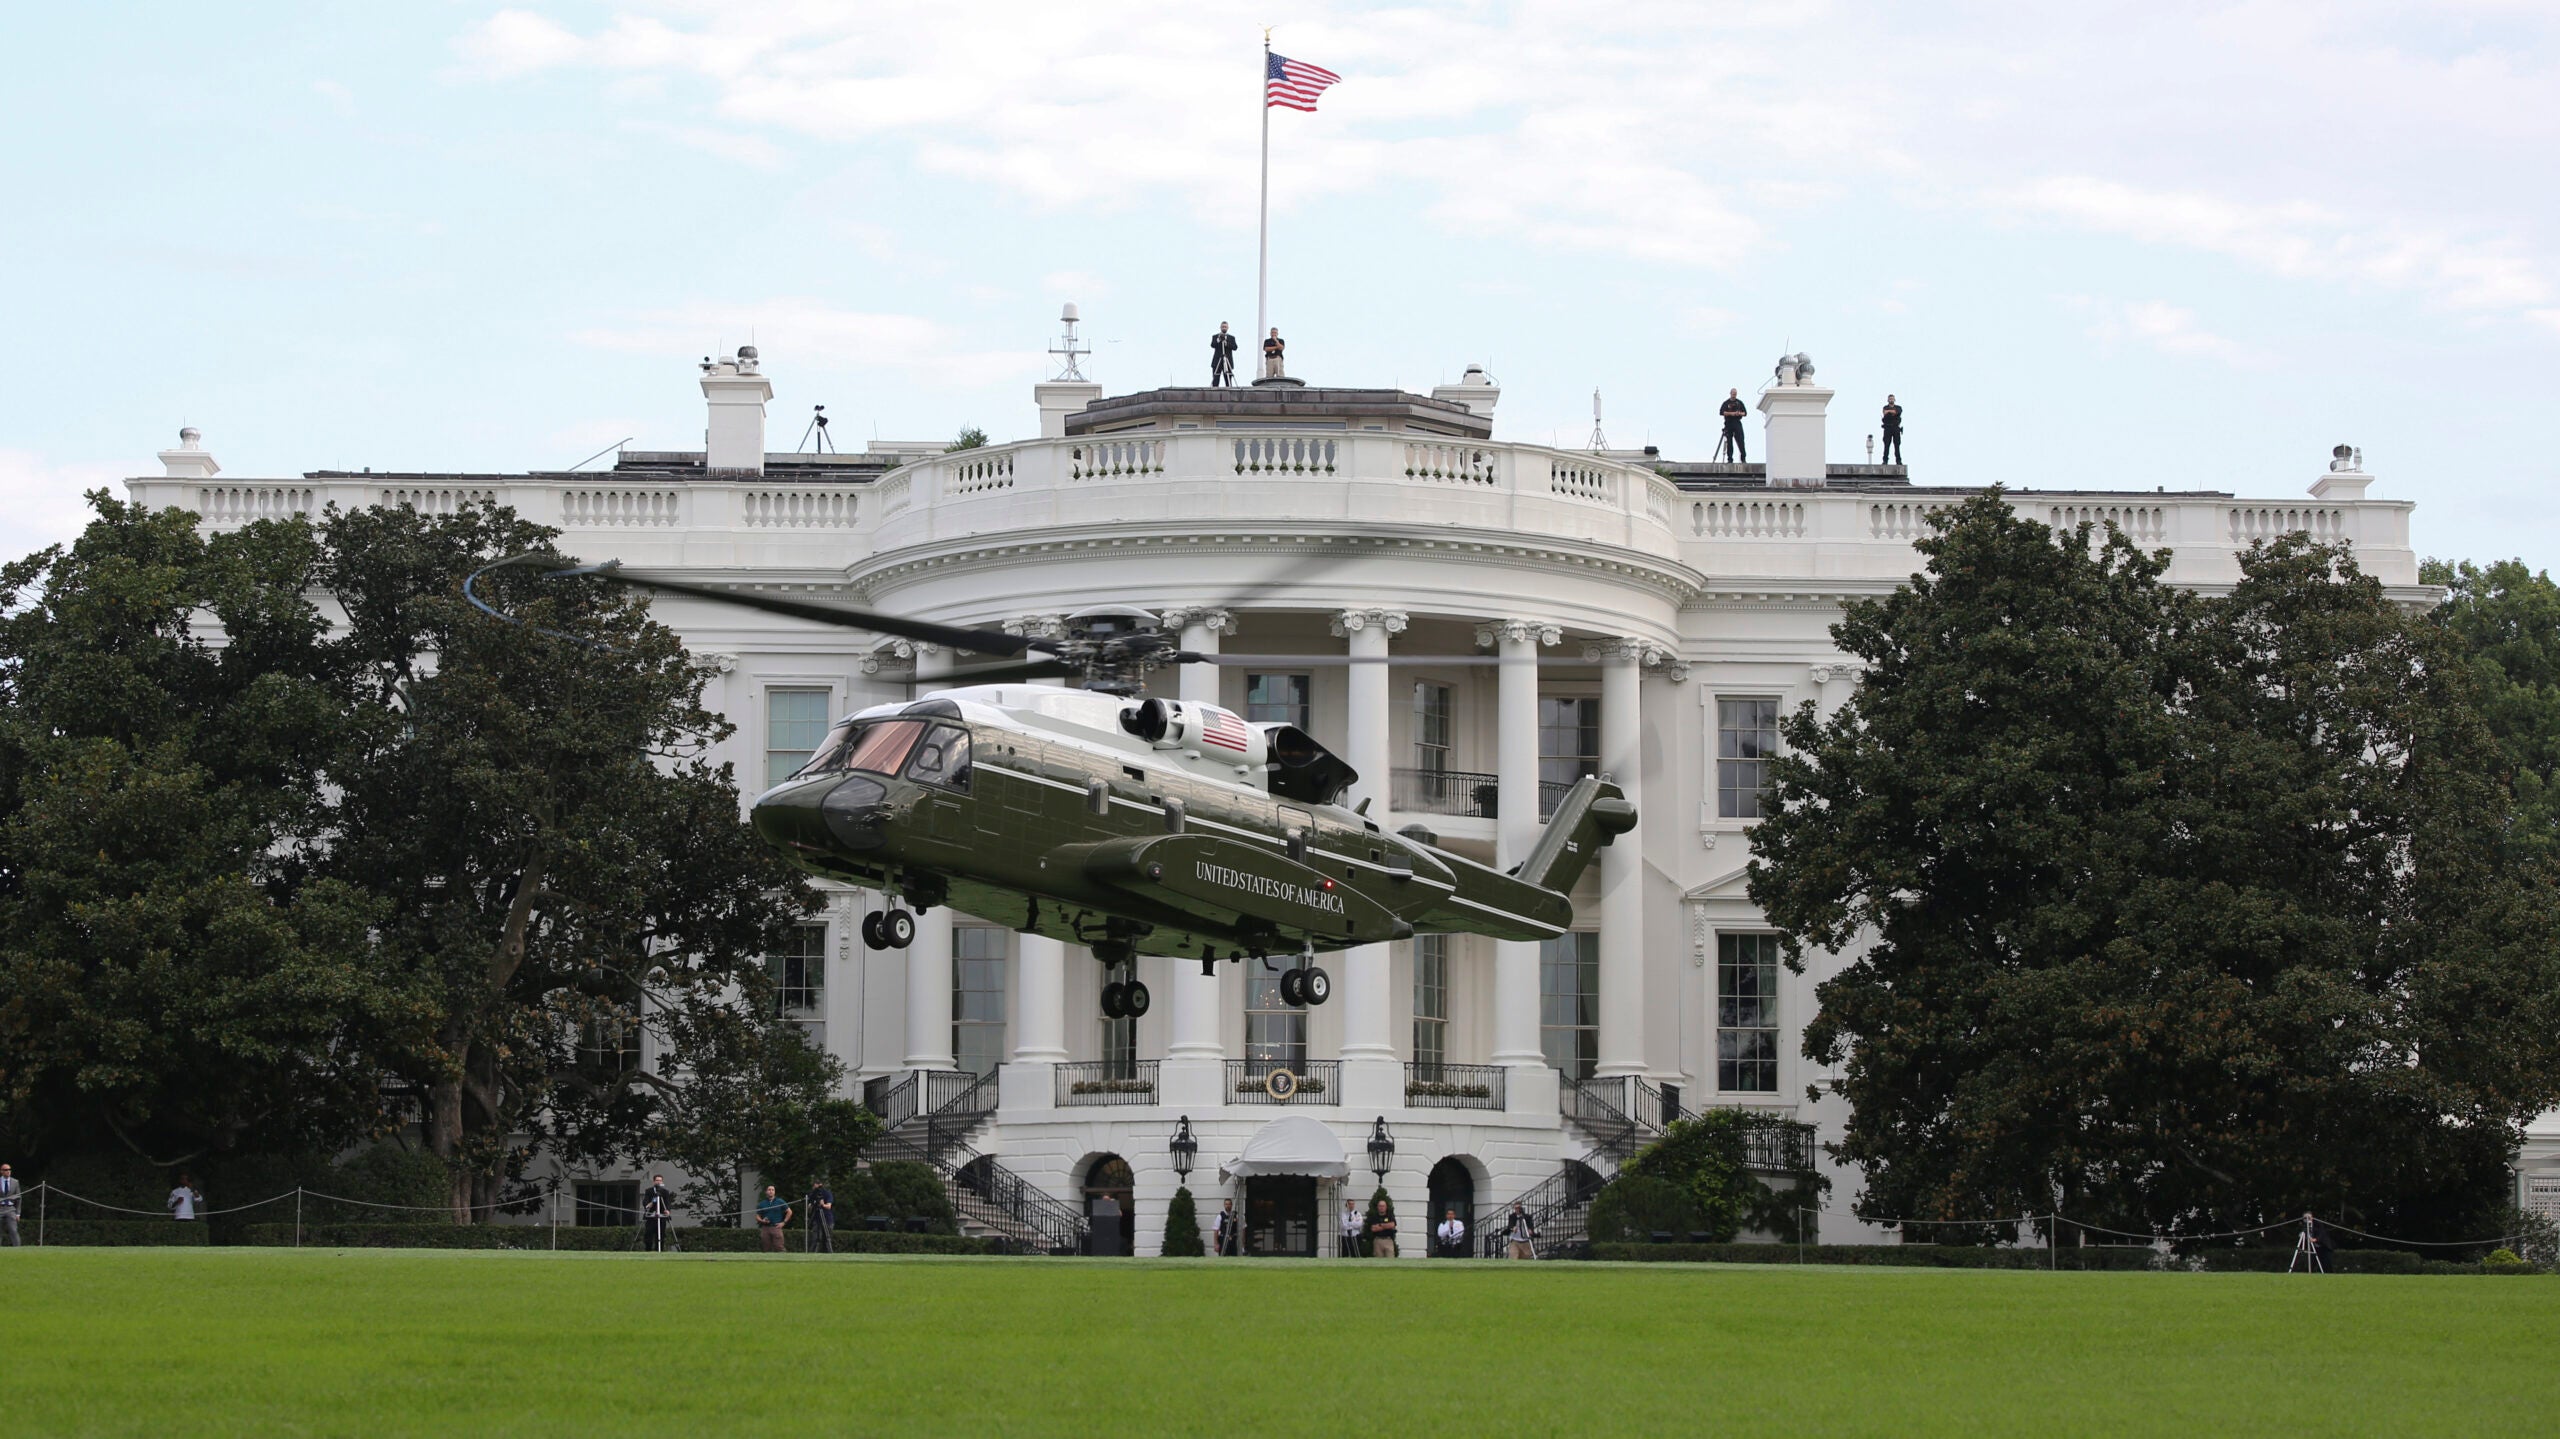 Marine Helicopter Squadron One (HMX-1) runs test flights of the new VH-92A over the south lawn of the White House on Sept. 22, 2018, Washington D.C. (U.S. Marine Corps photo by Sgt. Hunter Helis)